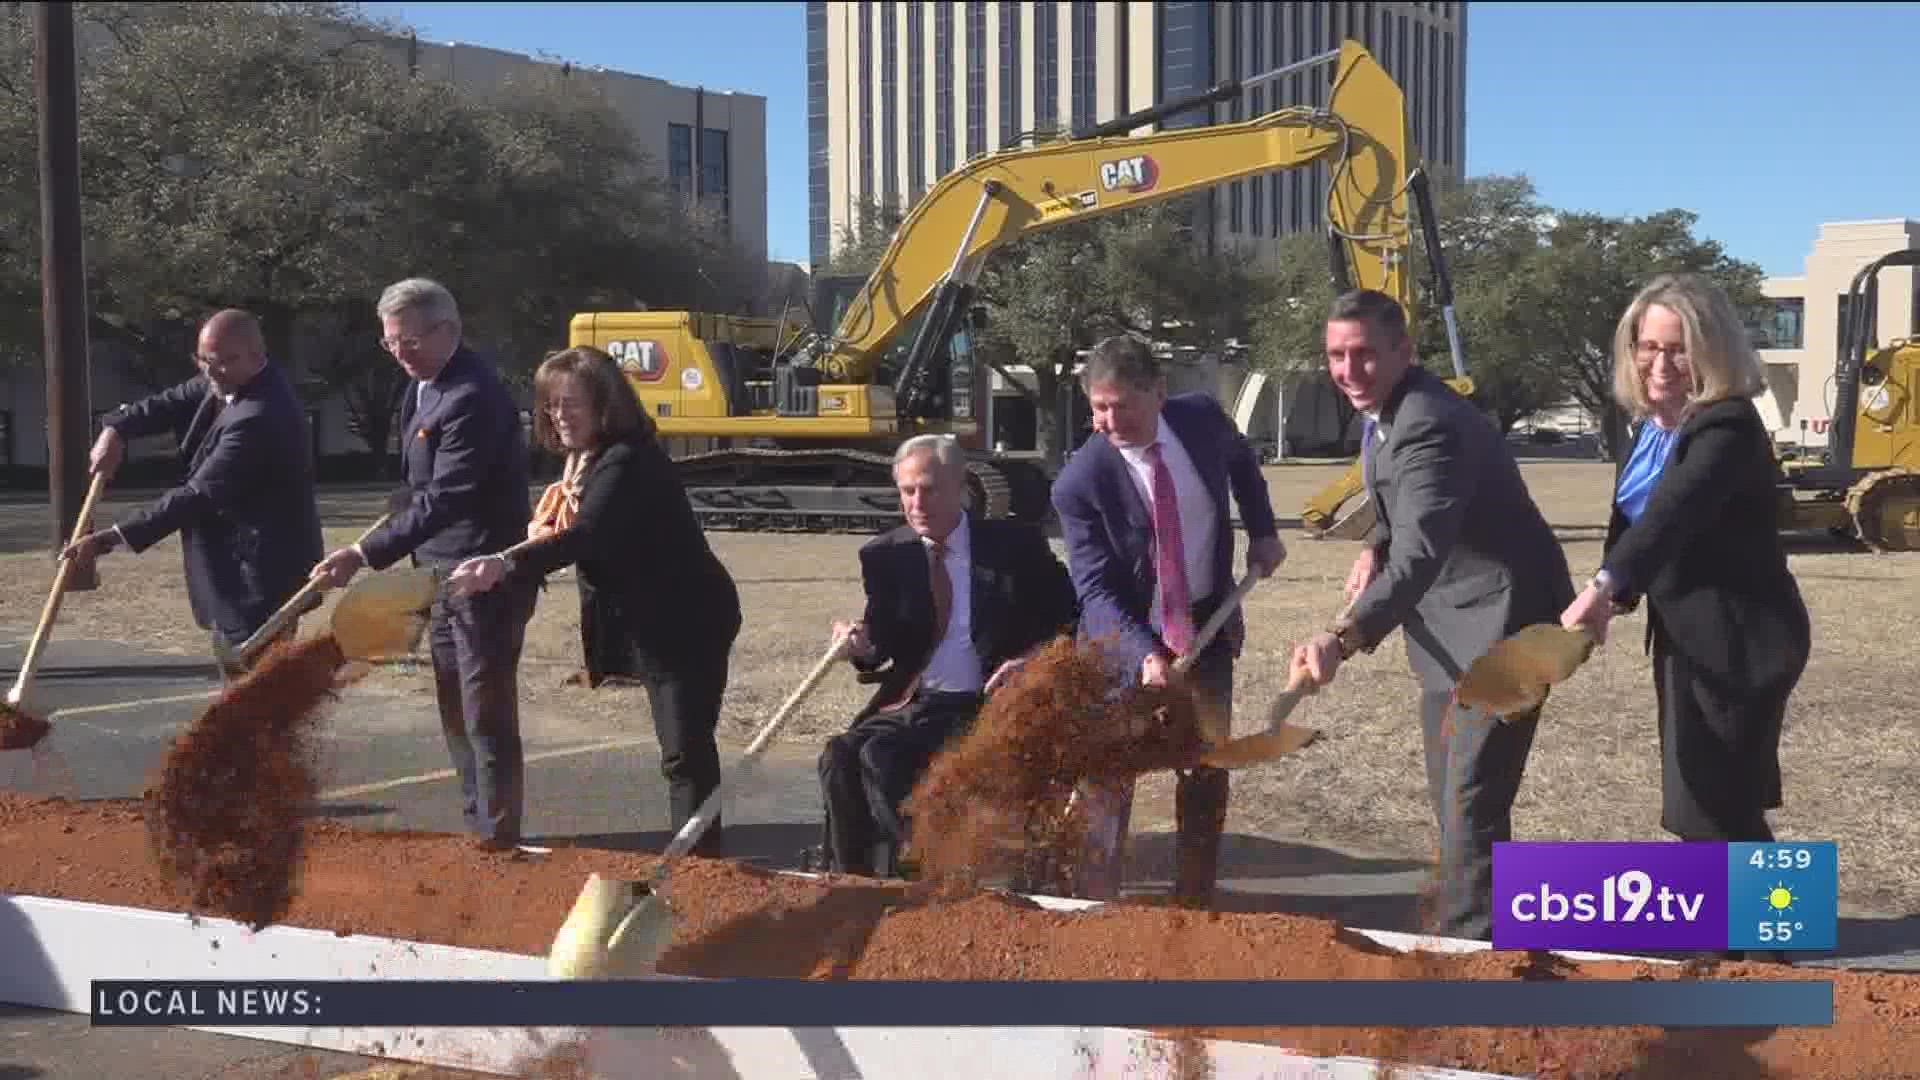 This medical school will be the first for Northeast Texas and the seventh for the University of Texas System. The first class will be welcomed this summer.